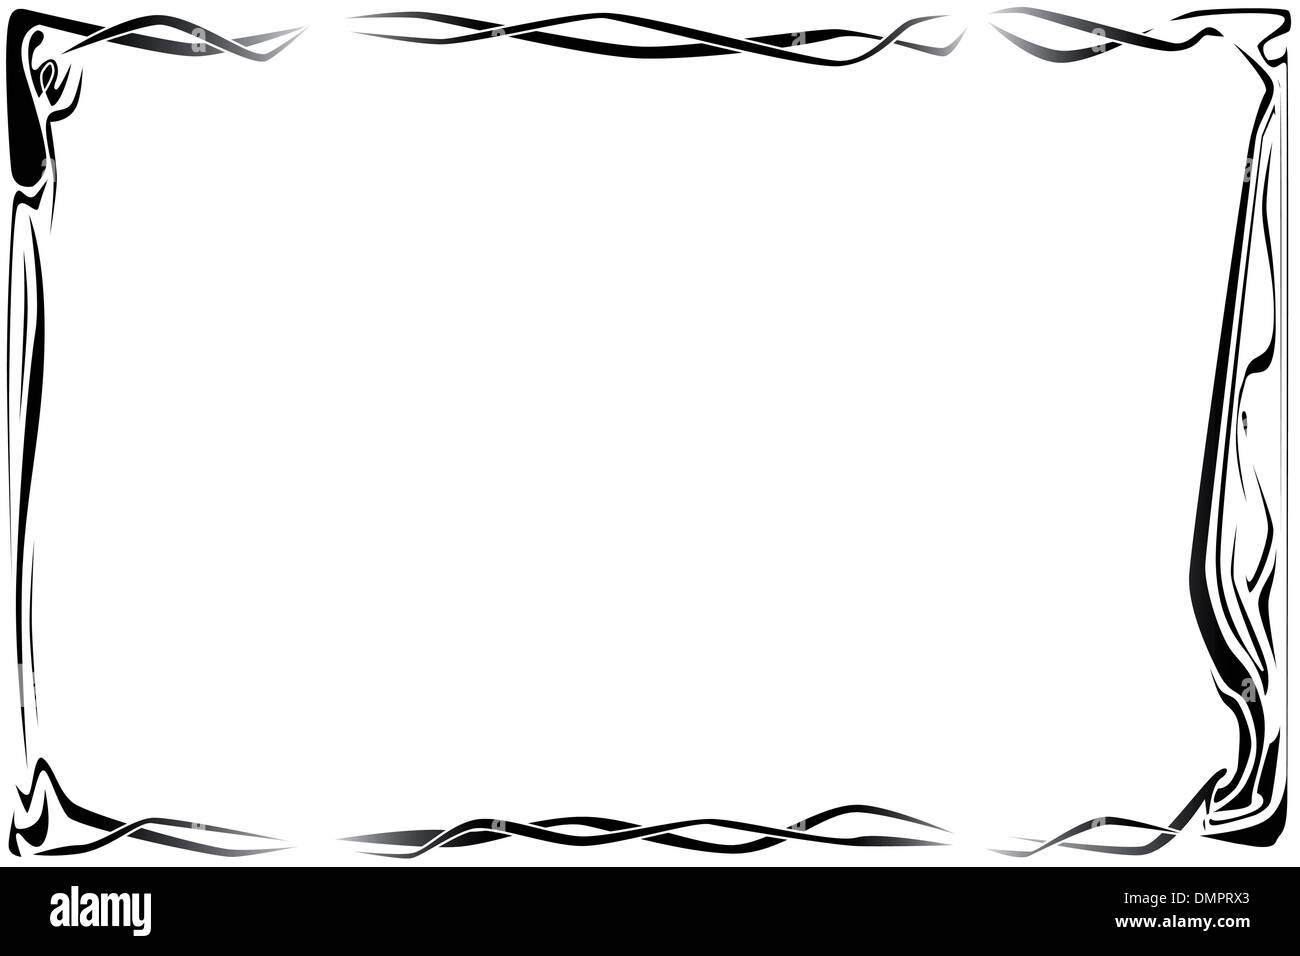 Page border Black and White Stock Photos & Images - Alamy